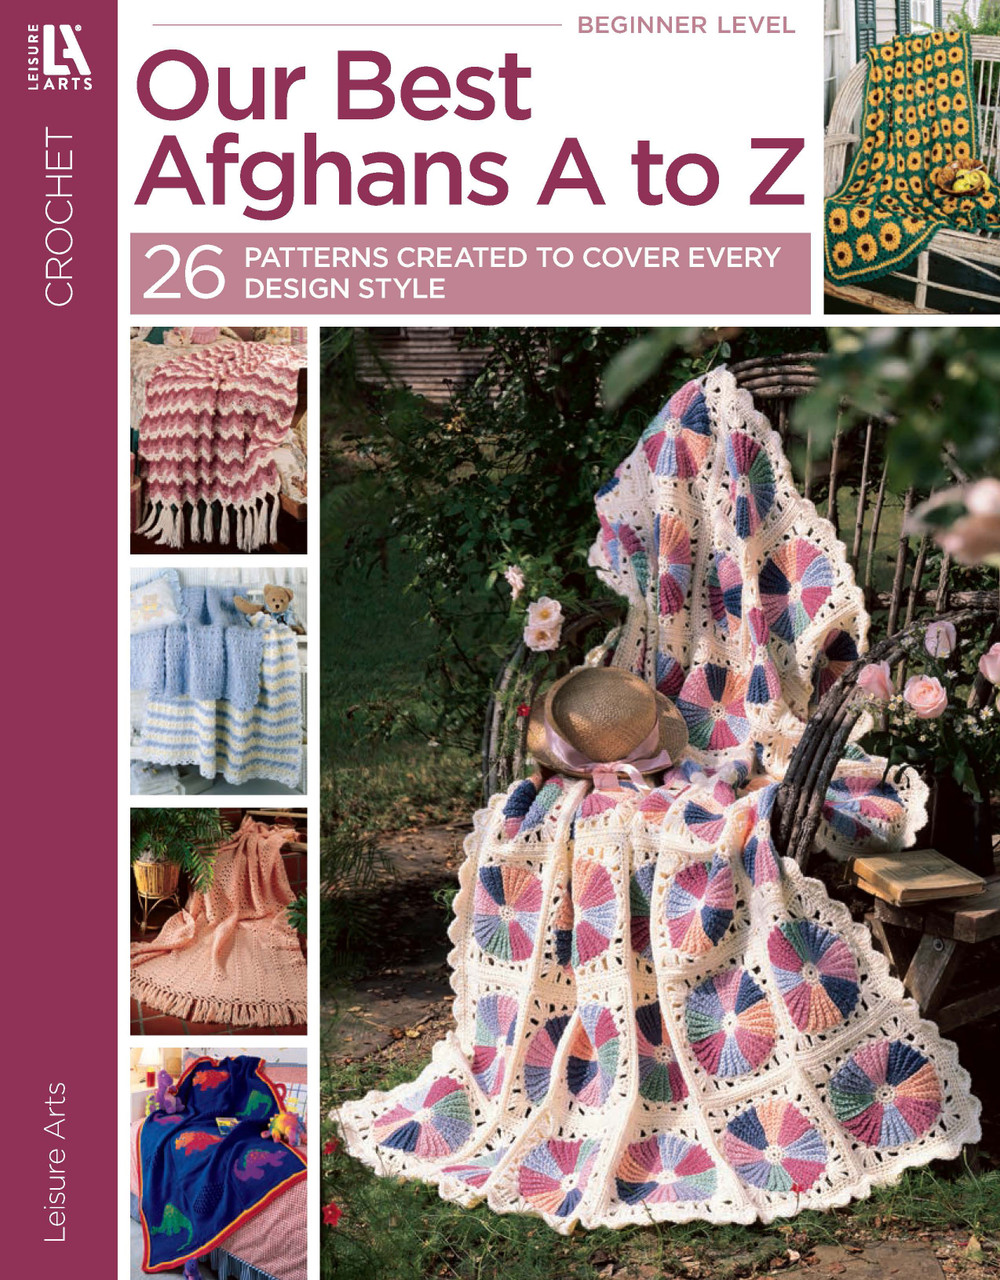 Leisure Arts Crochet Afghan Book Collection 5pc